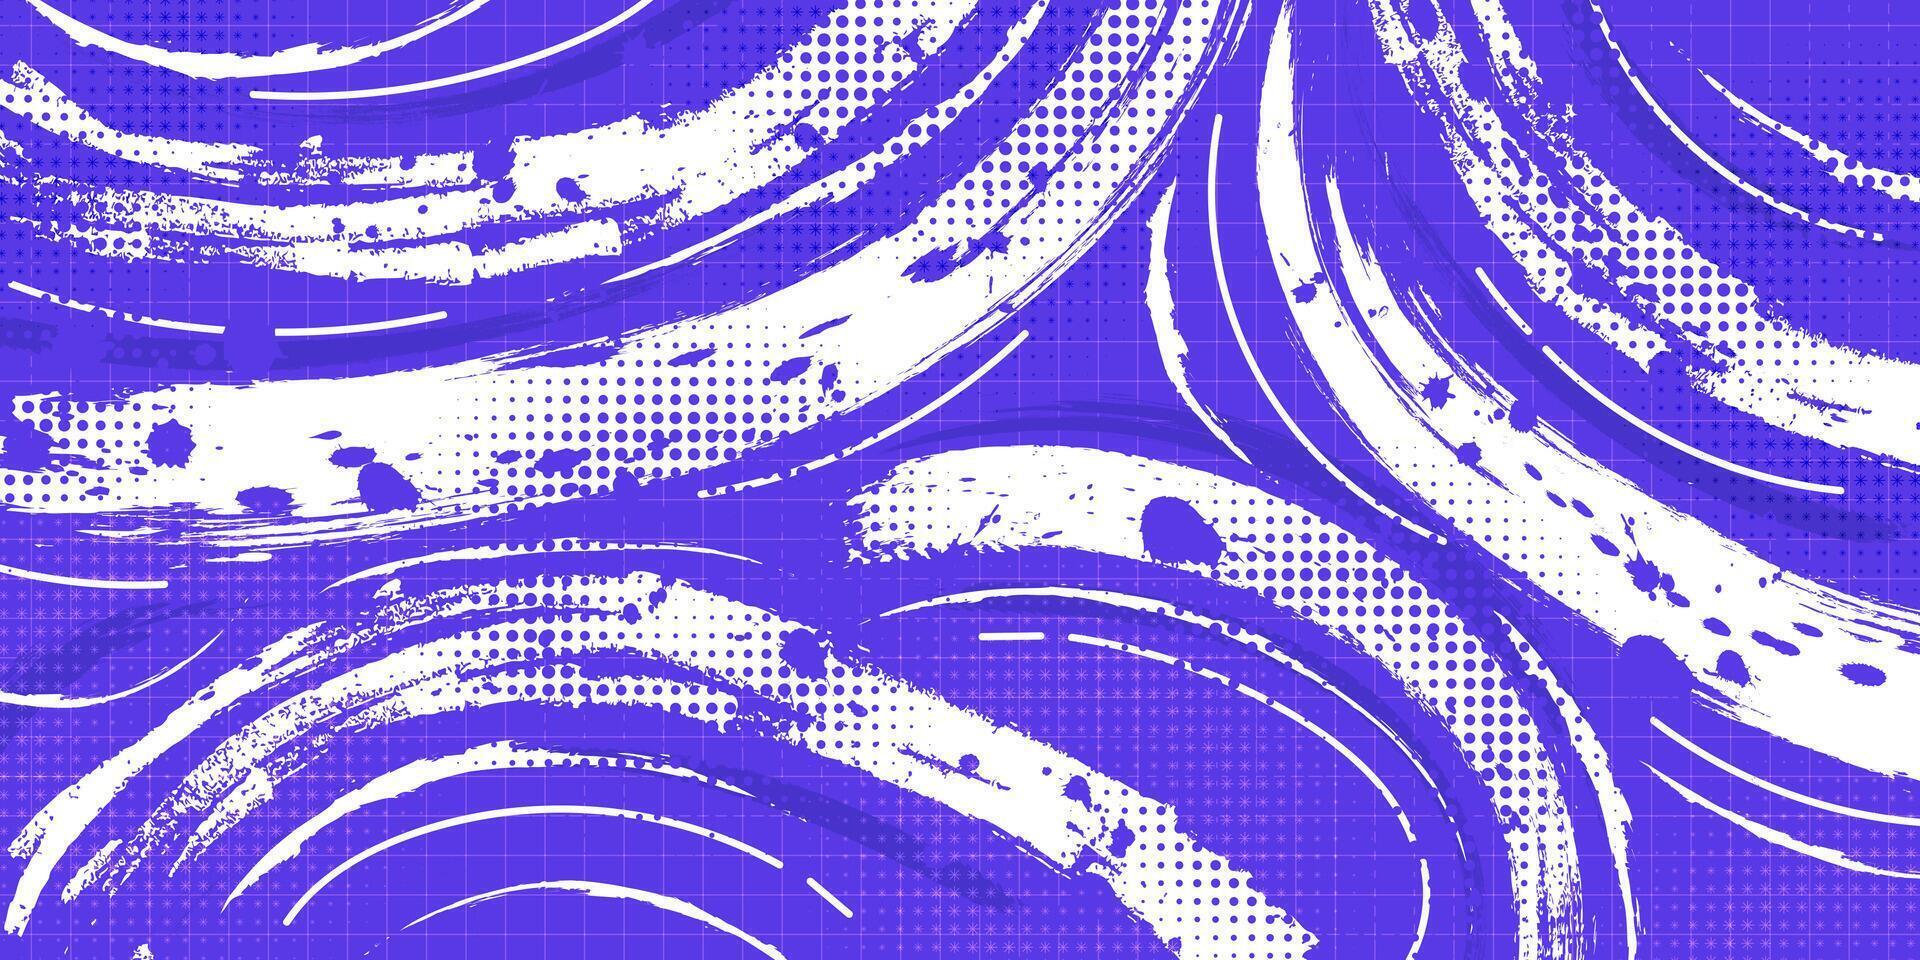 Abstract Brush Background with White and Purple Brush Texture and Halftone Effect. Retro Grunge Background for Banner or Poster Design vector